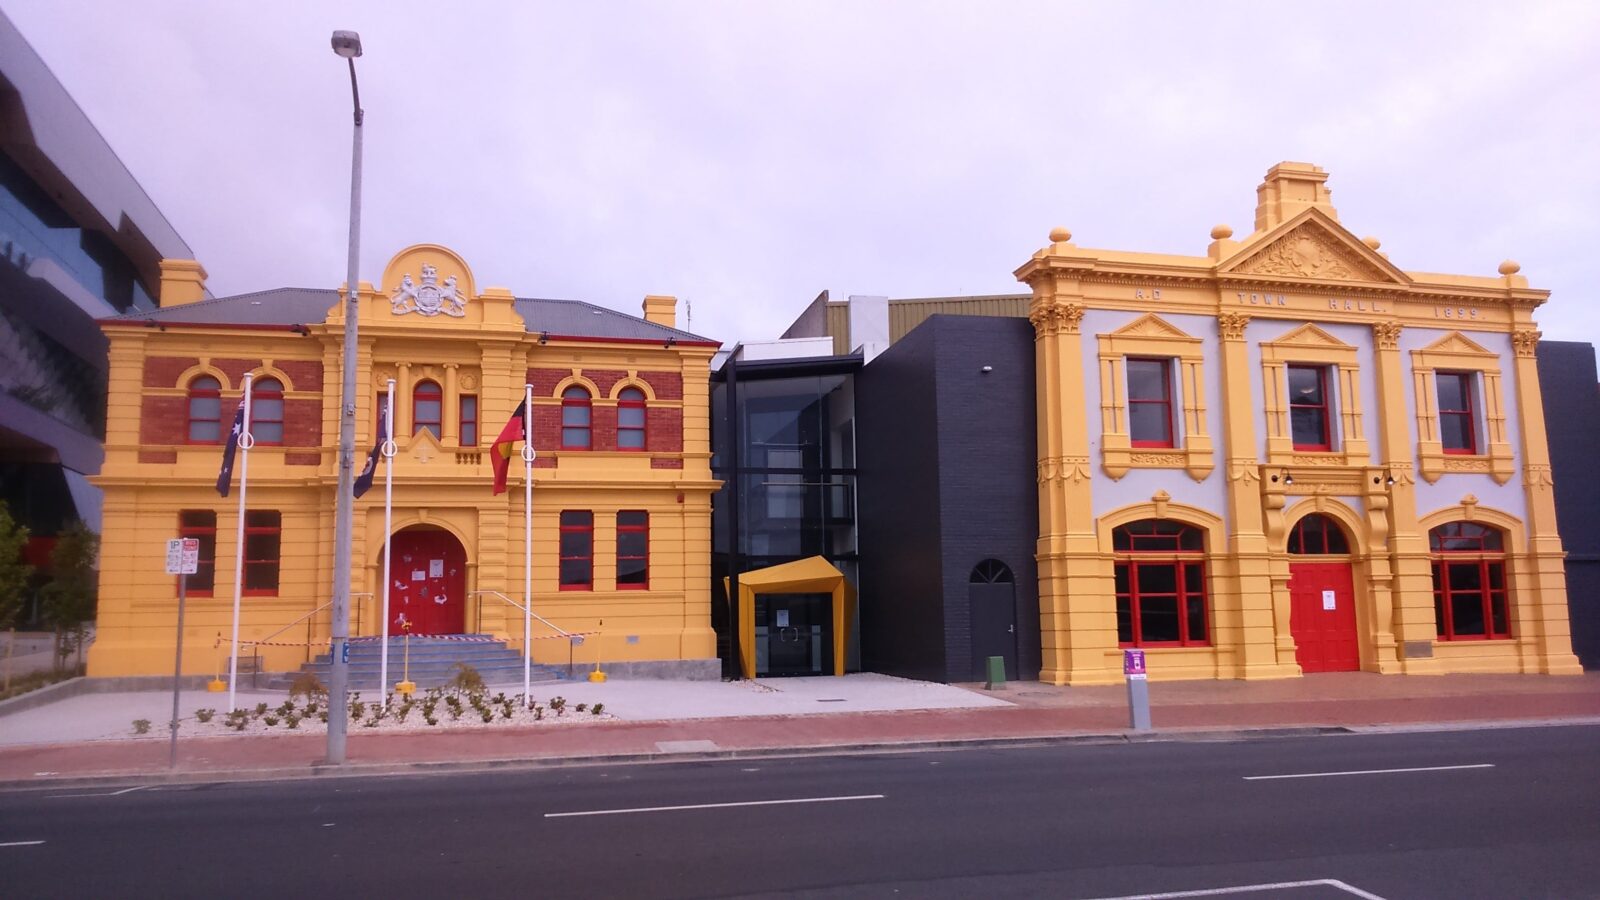 Rooke Street facade of the paranaple arts centre, including the yellow Town Hall Theatre section